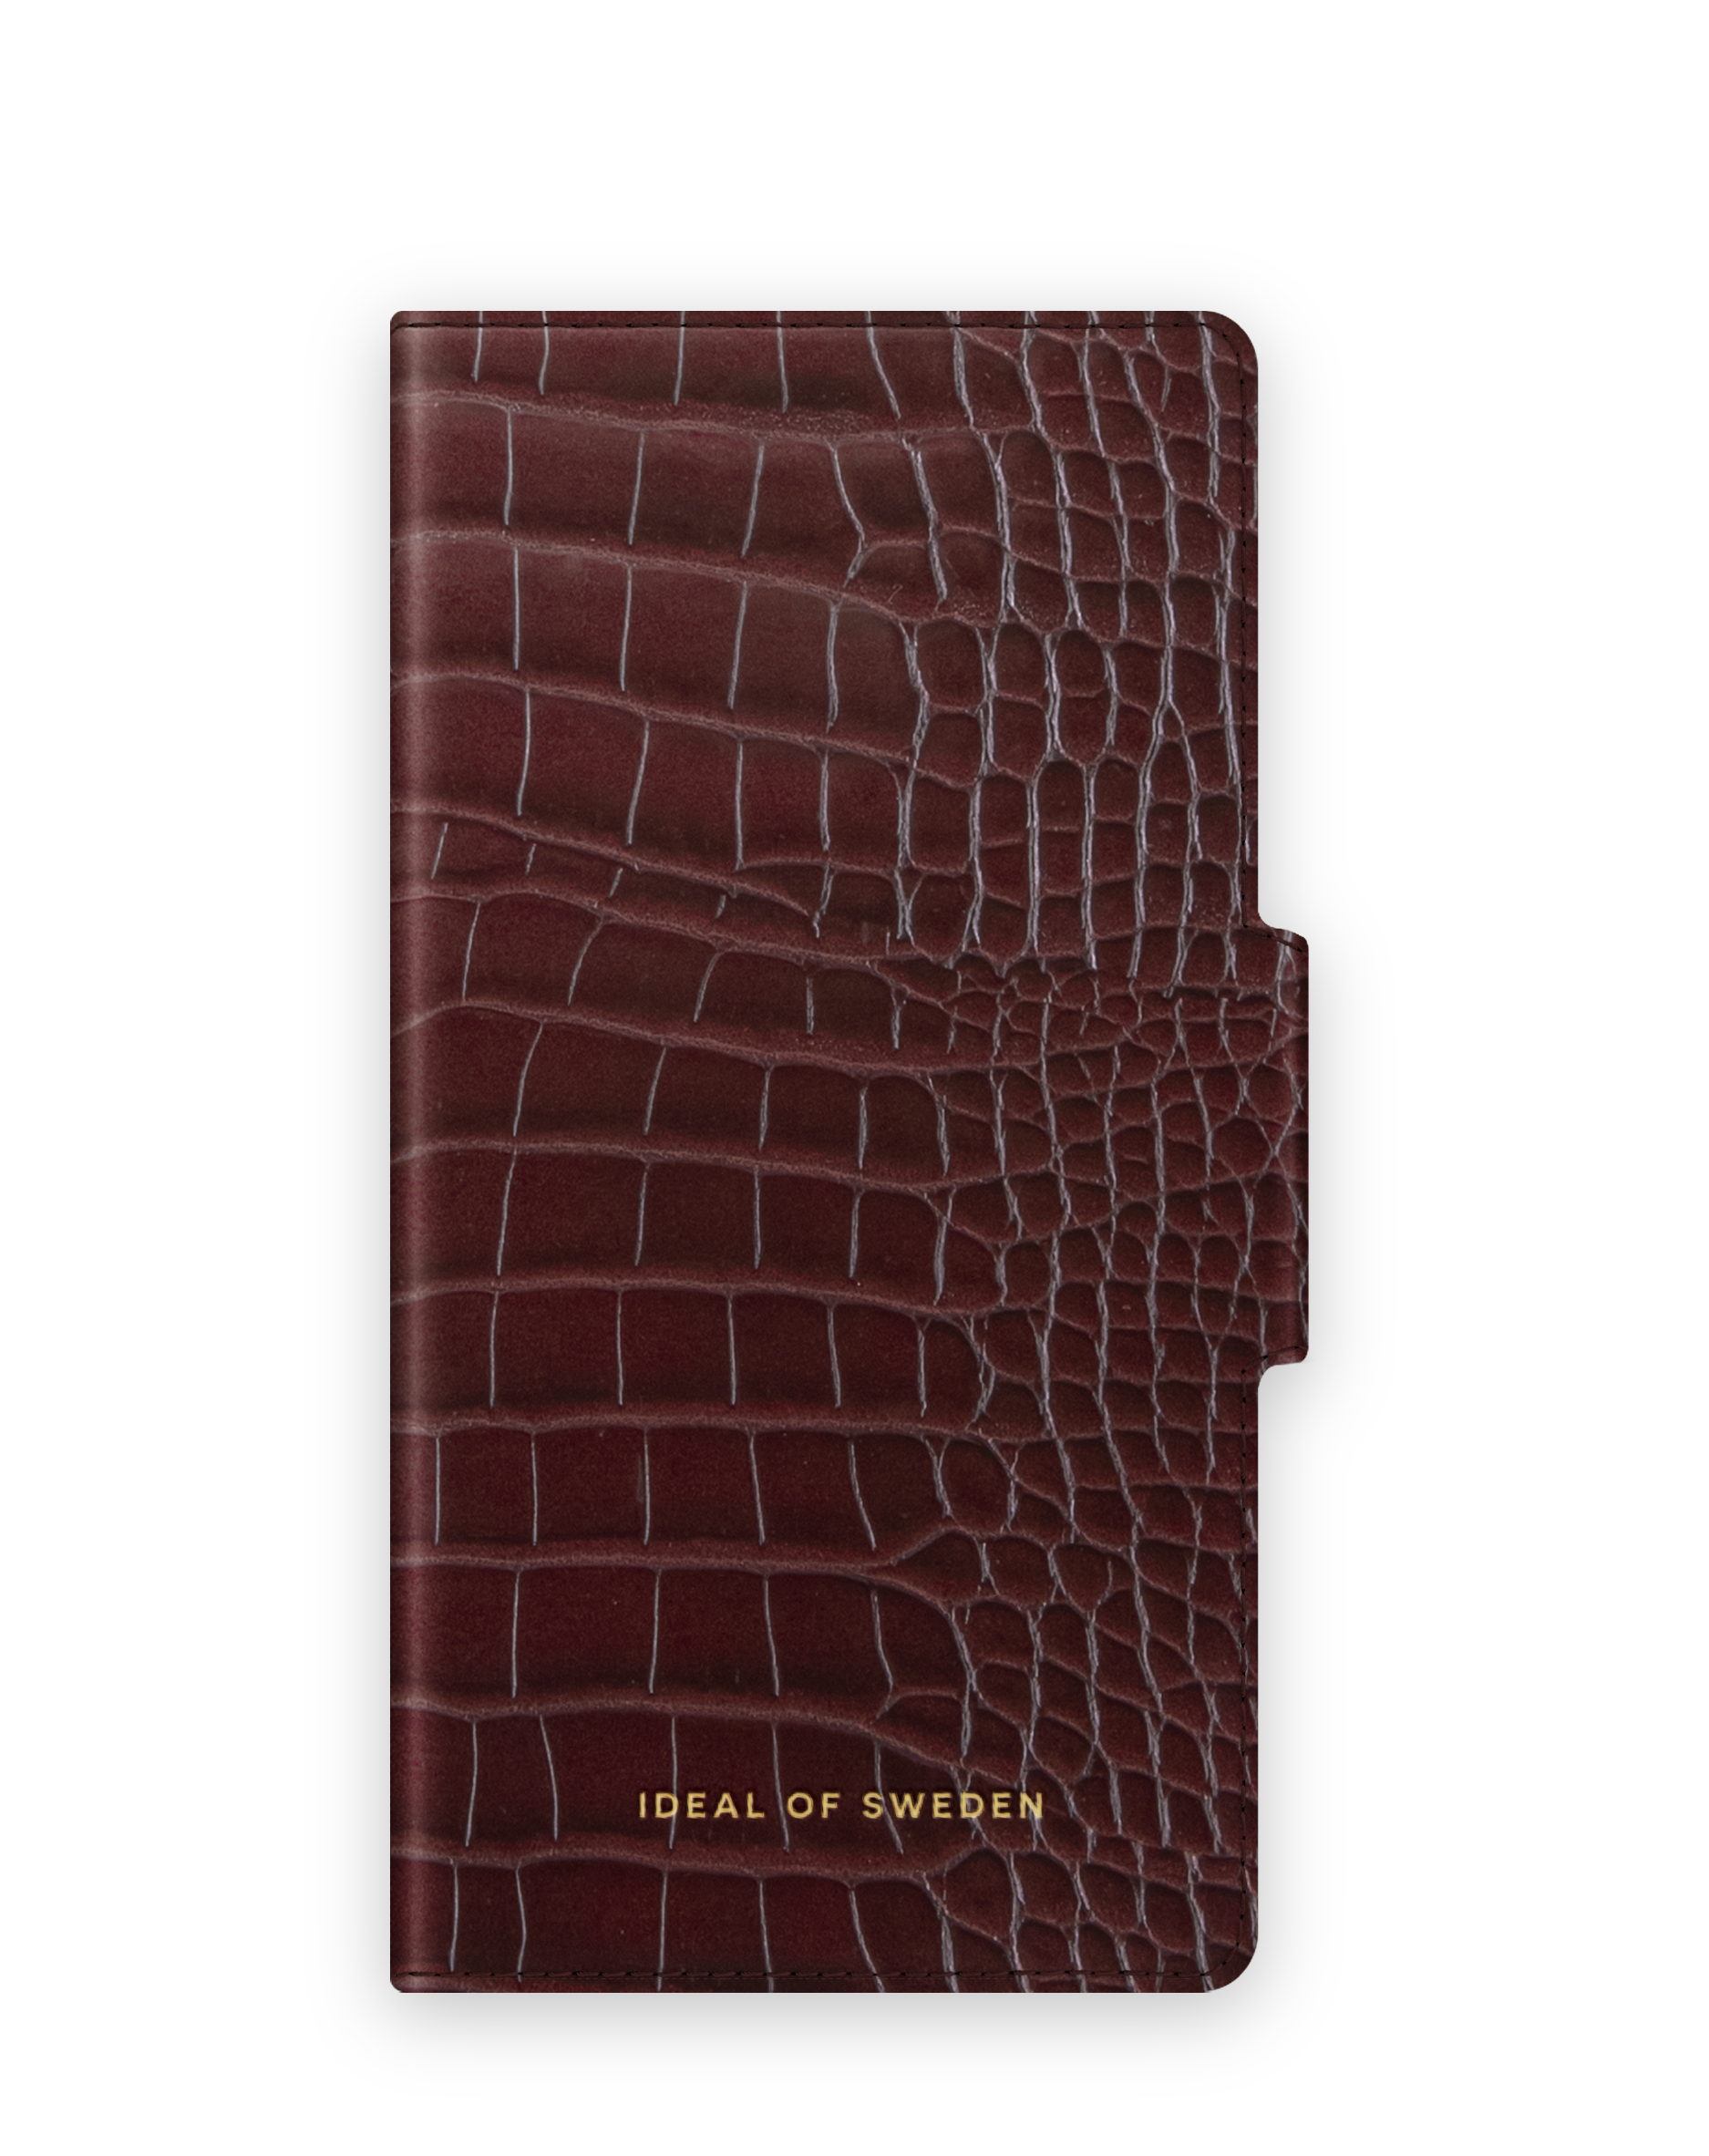 Croco iPhone IDEAL iPhone Apple, Bookcover, Scarlet IDAWAW21-I1961-326, SWEDEN XR, OF / 11